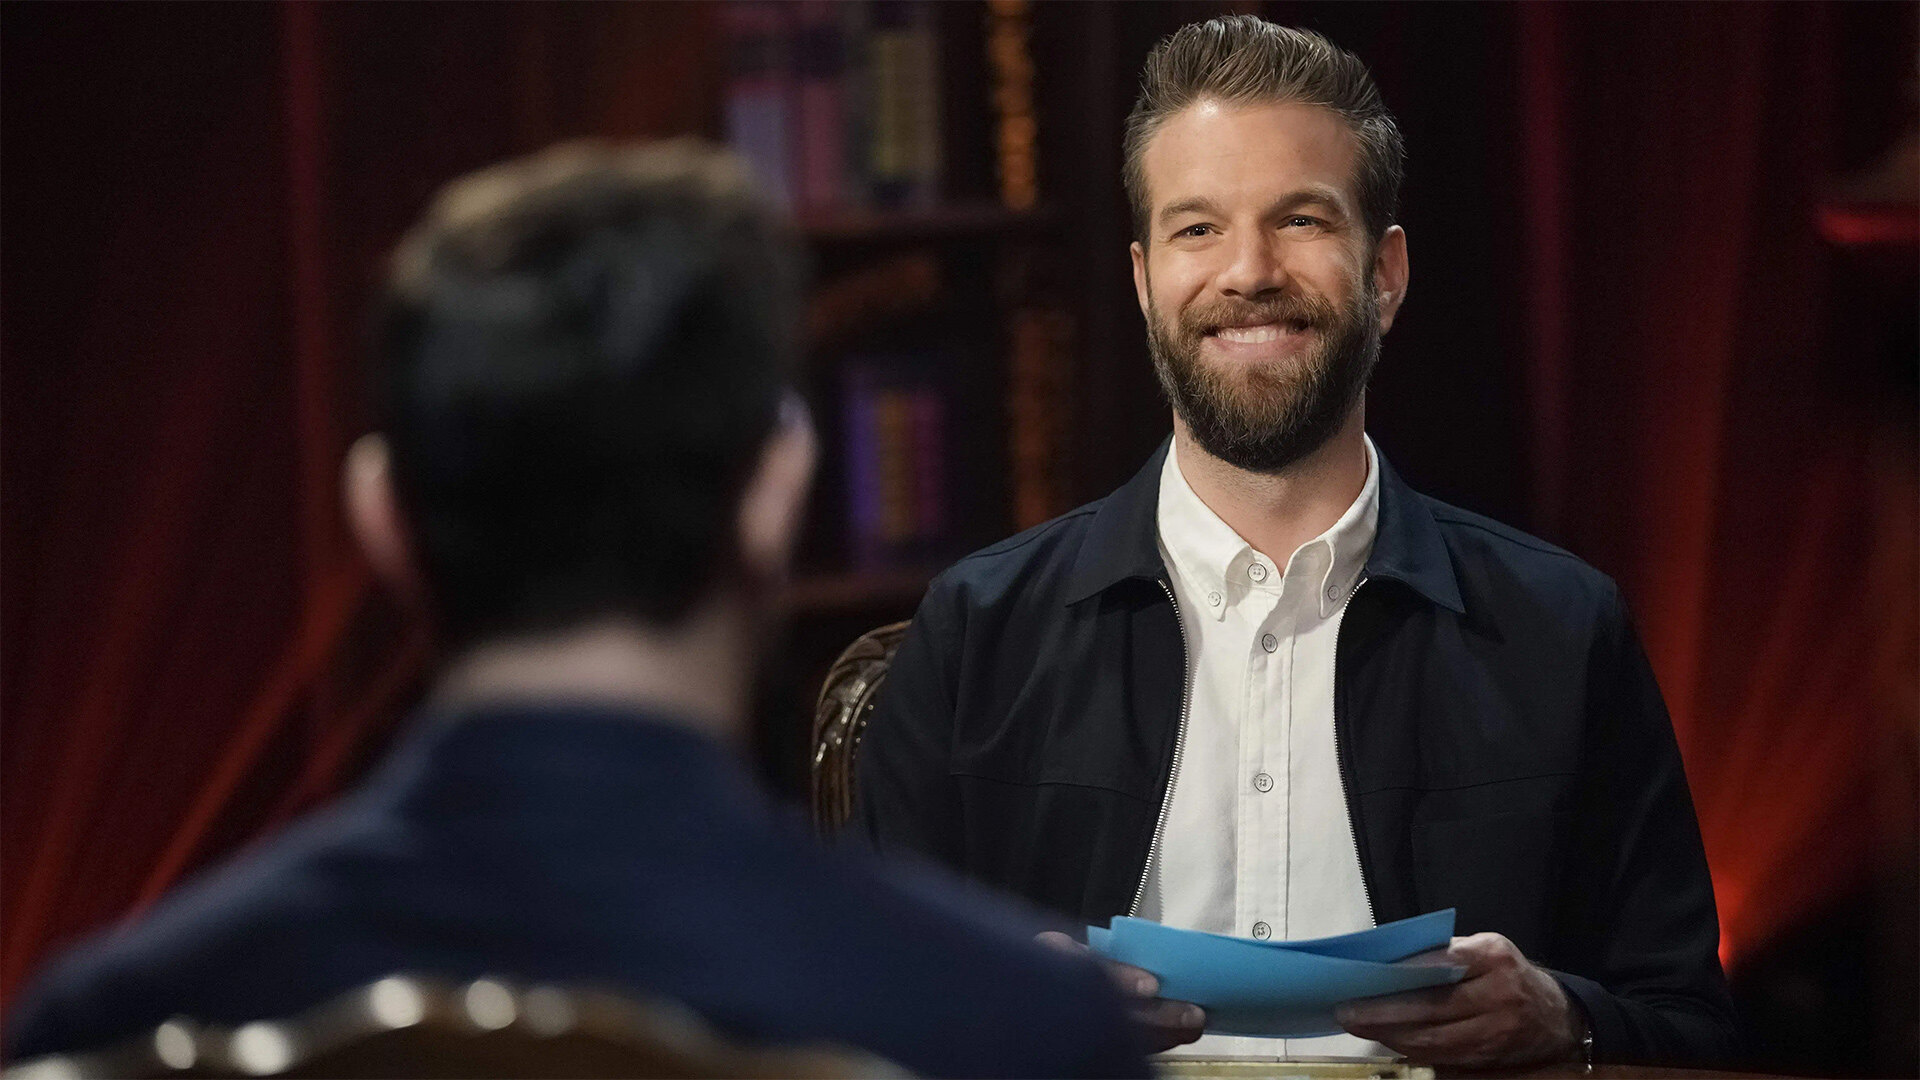 Good Talk with Anthony Jeselnik comments (TV Series 2019 - Now) .